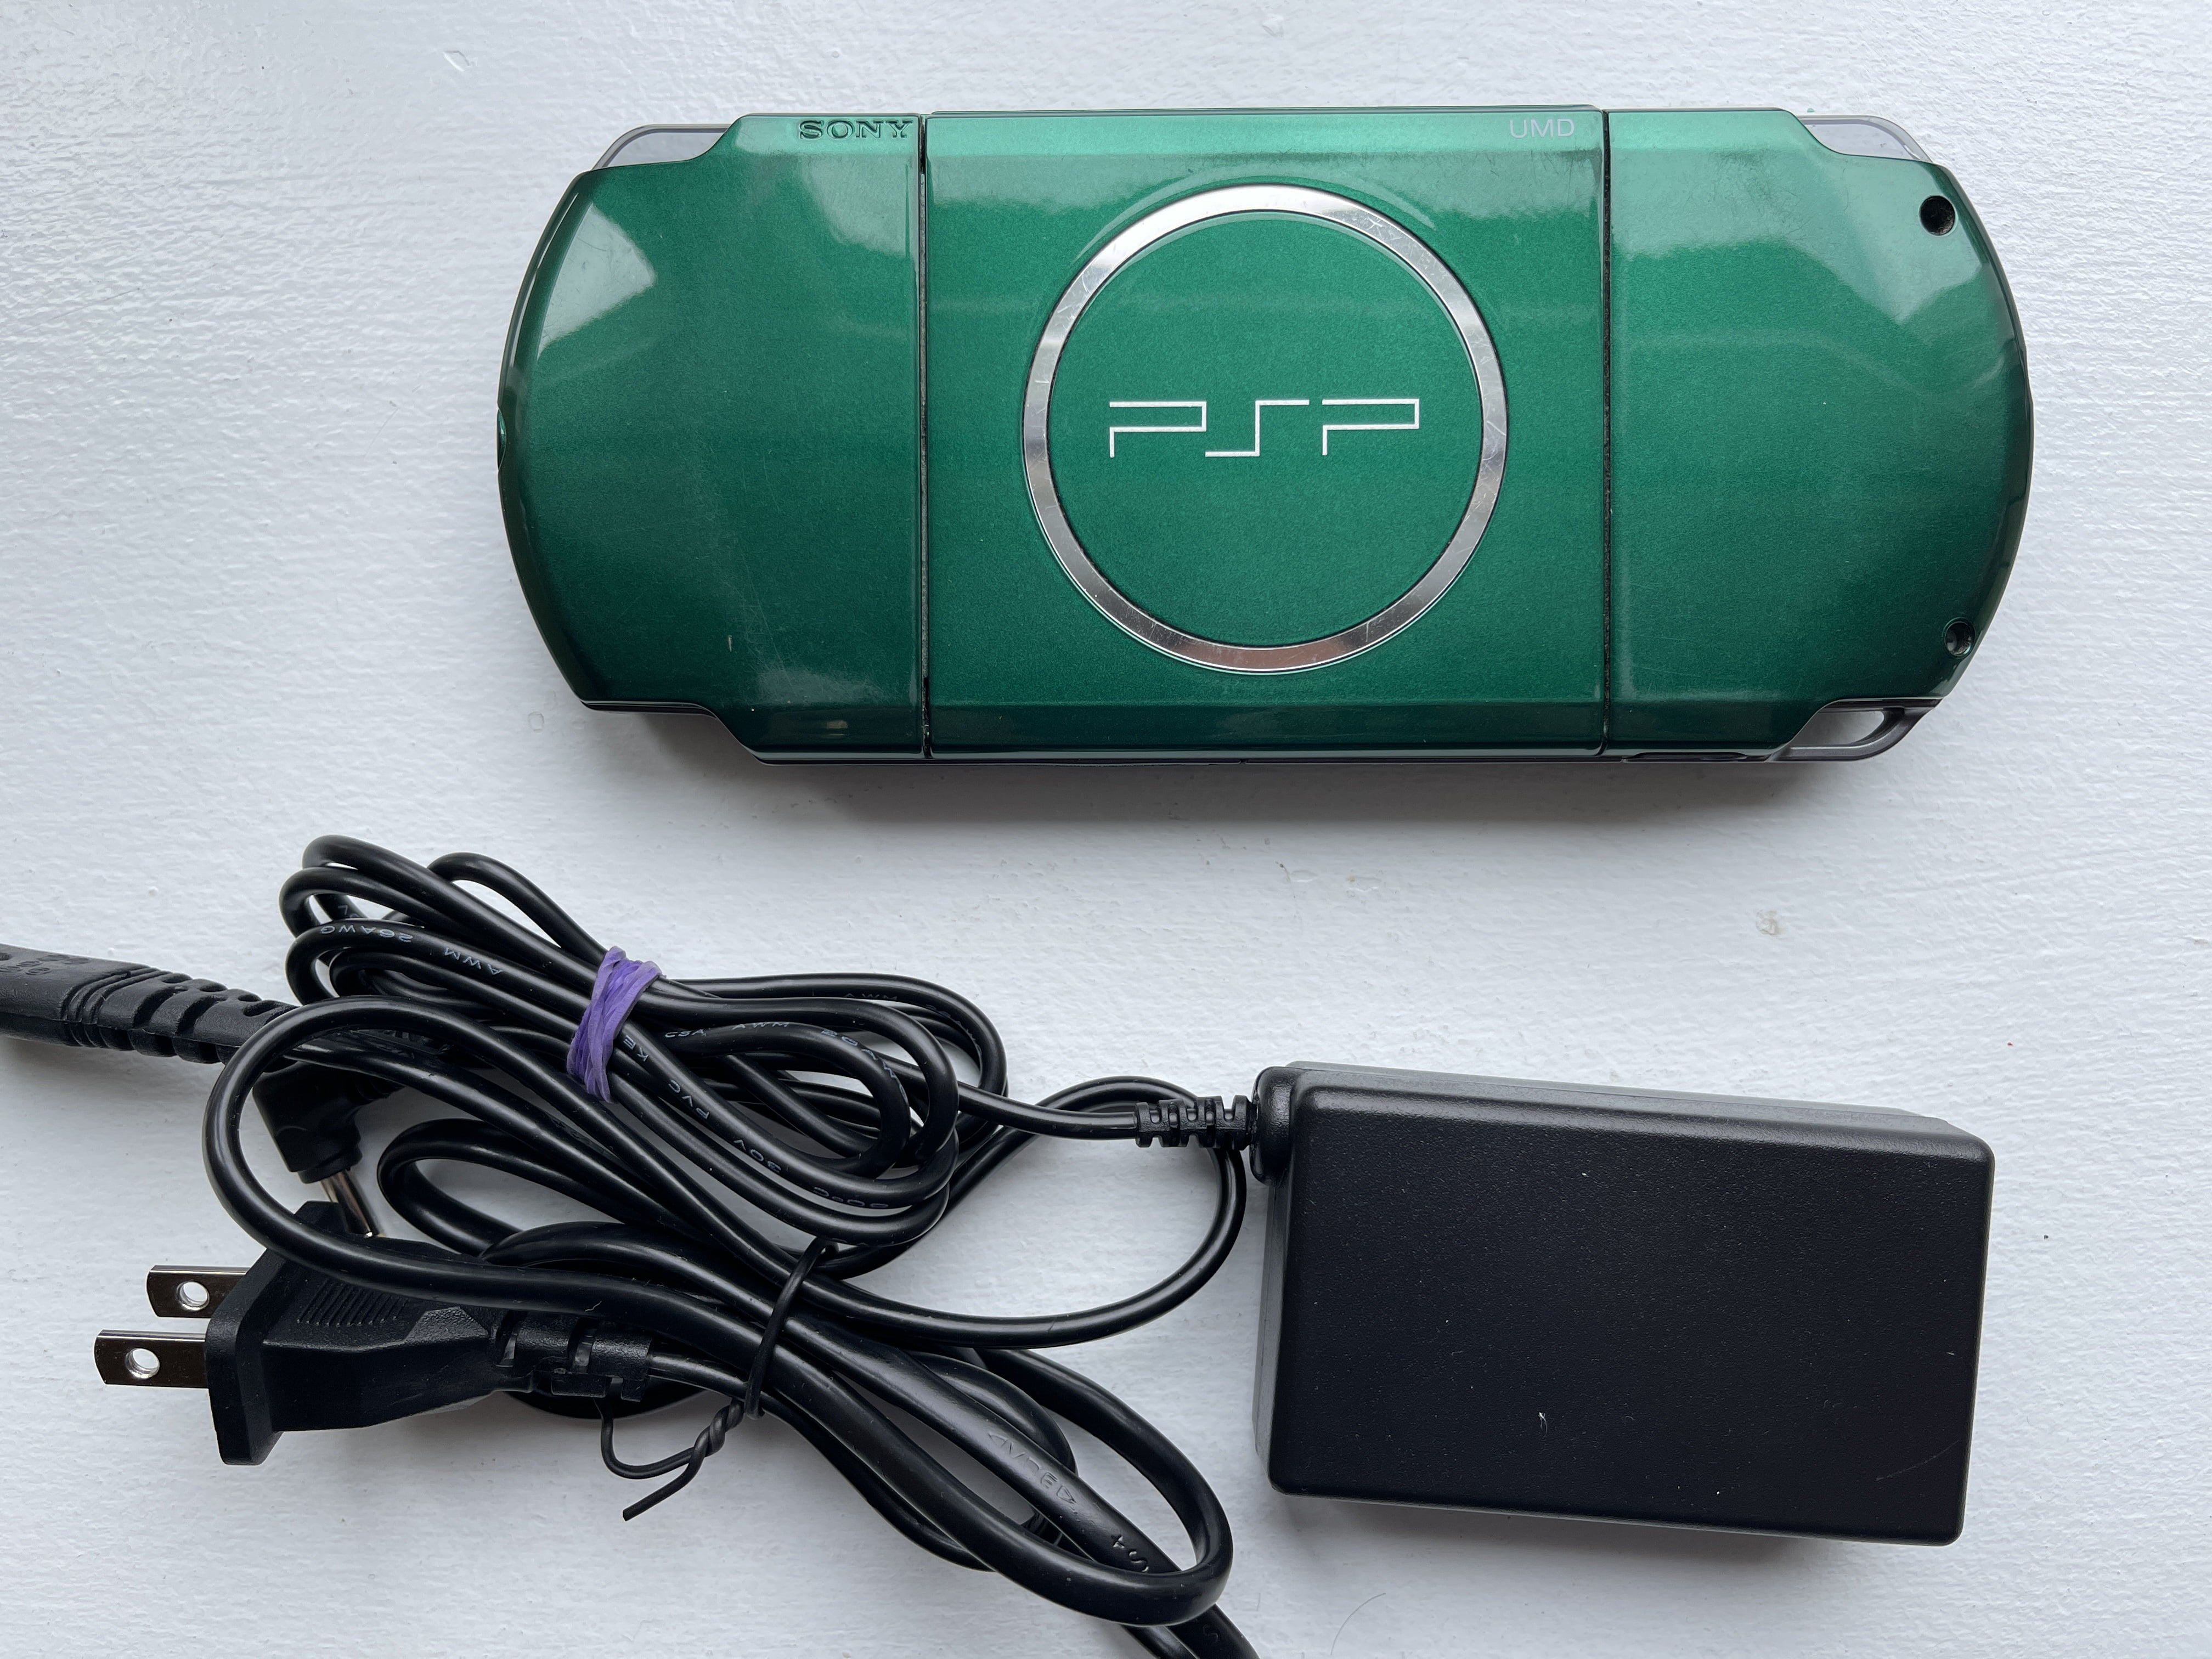 Playstation Portable Spirited Green PSP 3000SG Sony Limited Console F/S  used